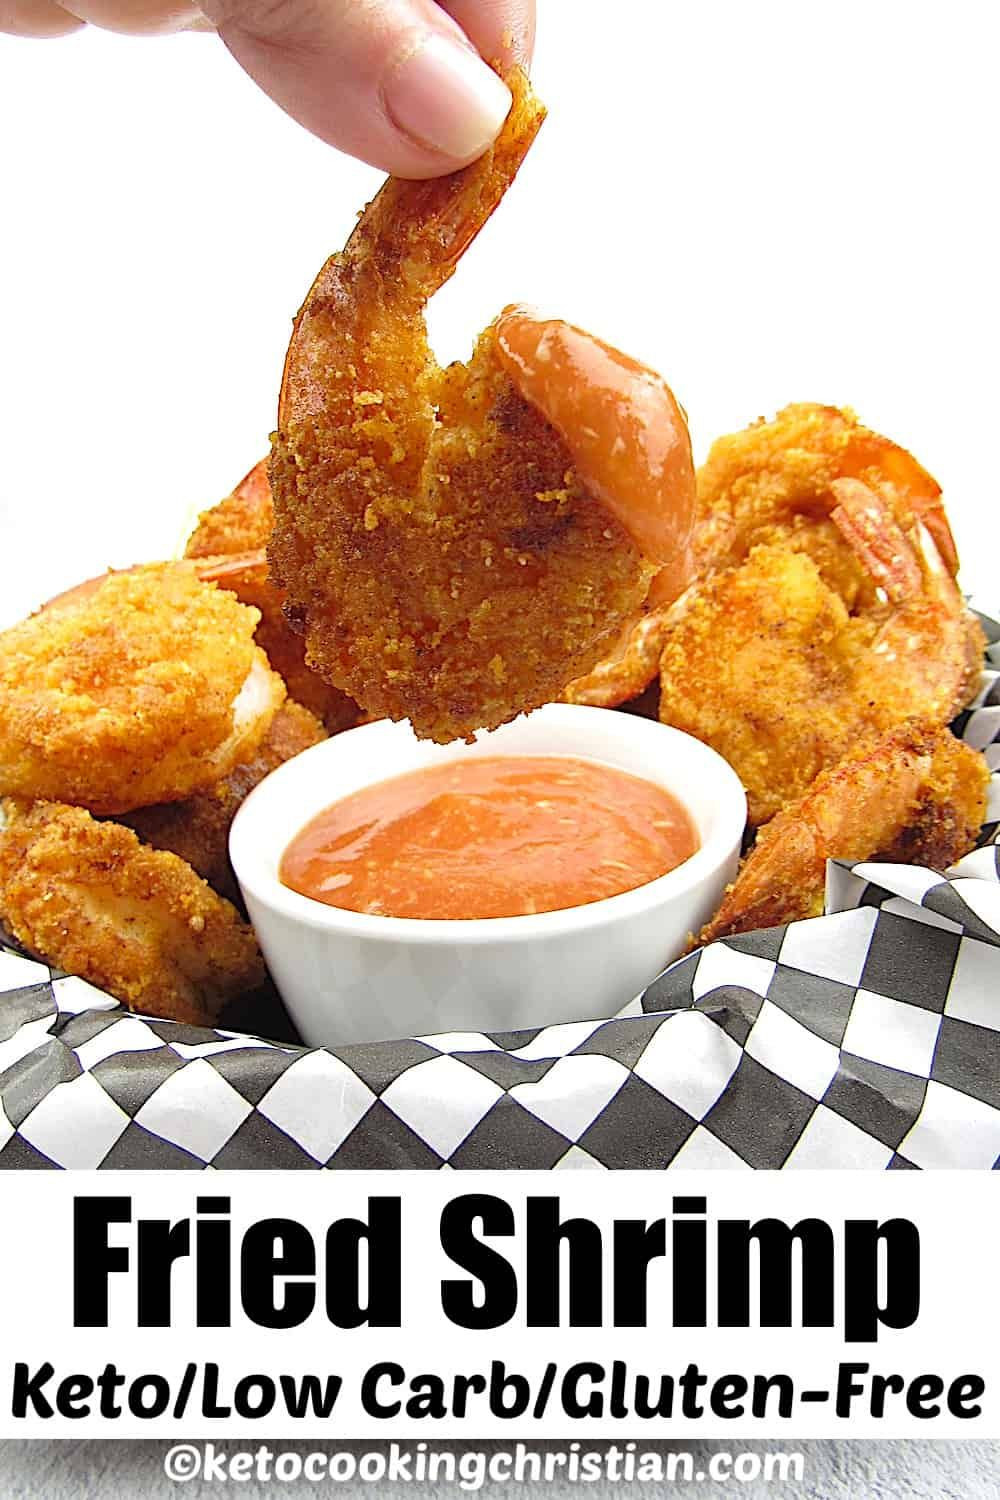 Low Carb Breaded Shrimp
 Keto Fried Shrimp with Cocktail Sauce Low Carb Gluten